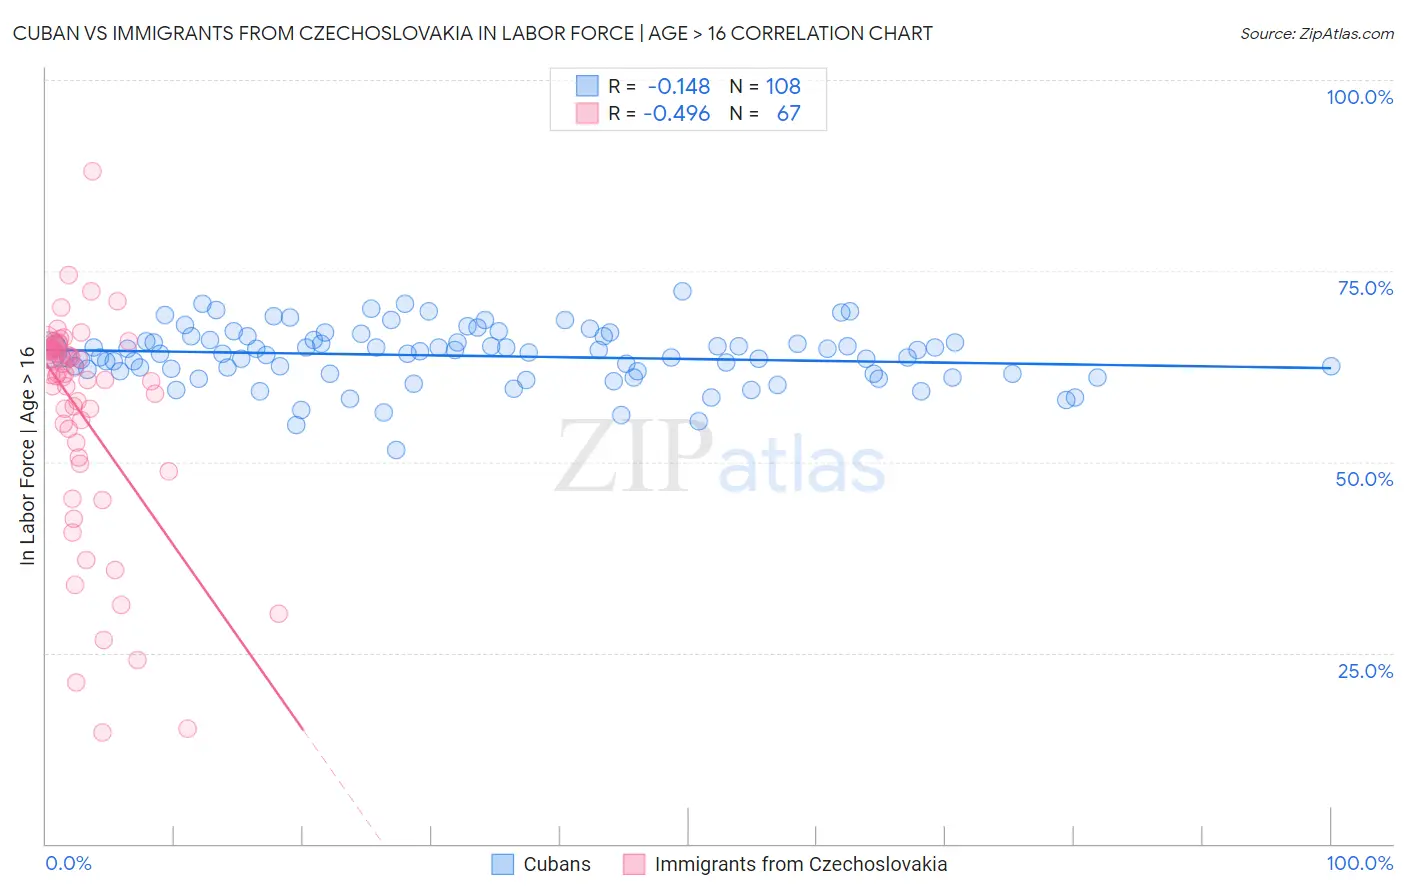 Cuban vs Immigrants from Czechoslovakia In Labor Force | Age > 16